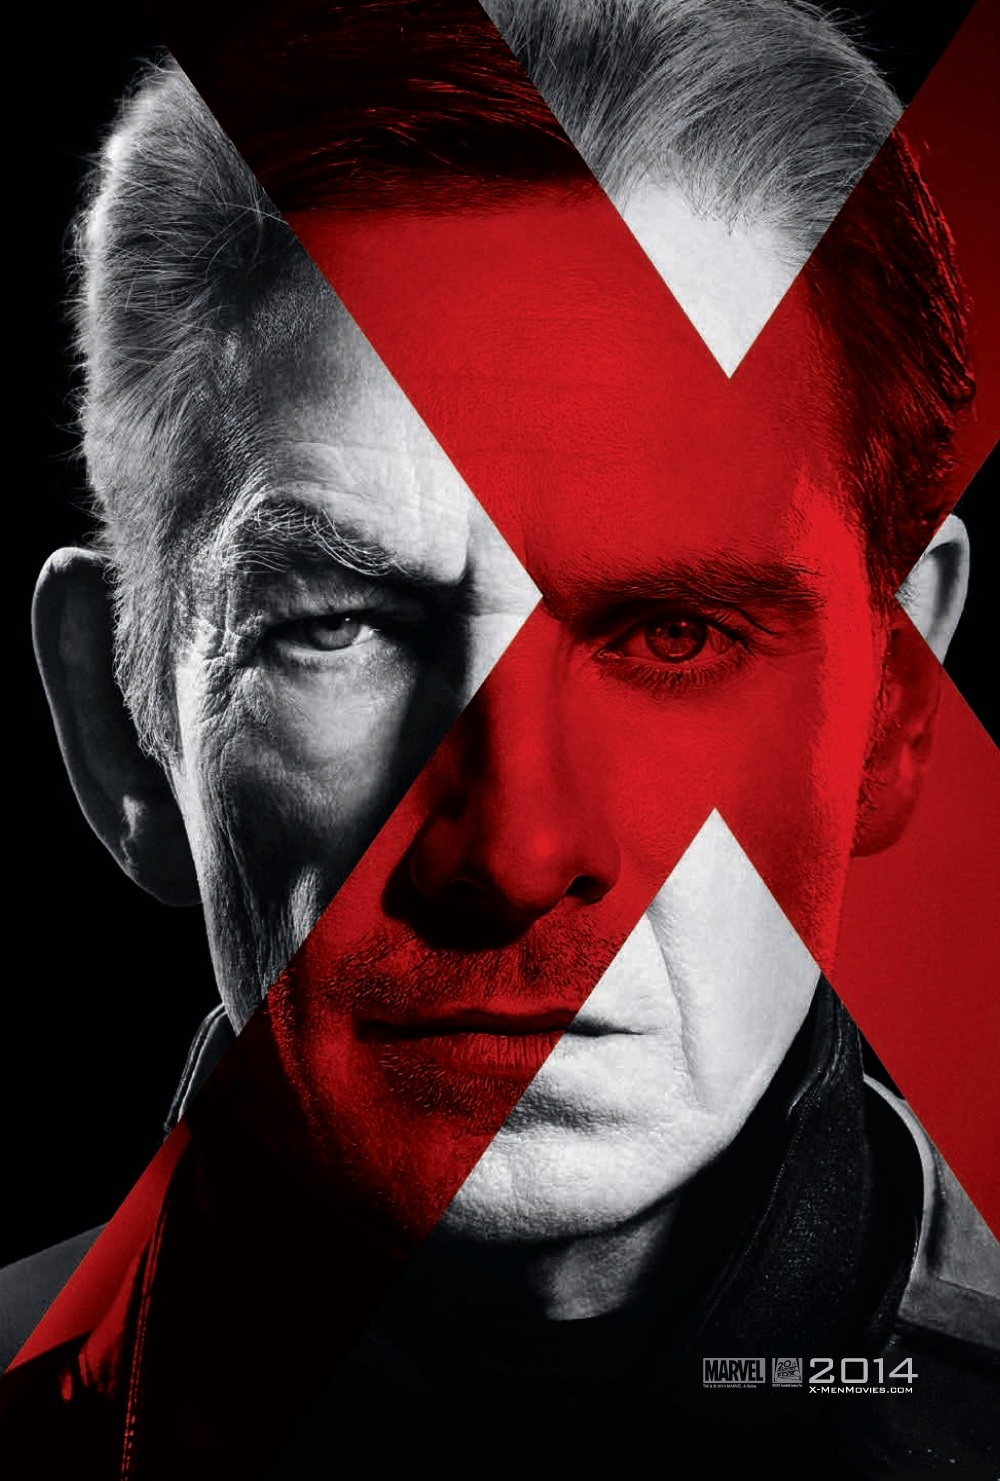 X-Men: Days of Future Past gets two amazing mash-up posters